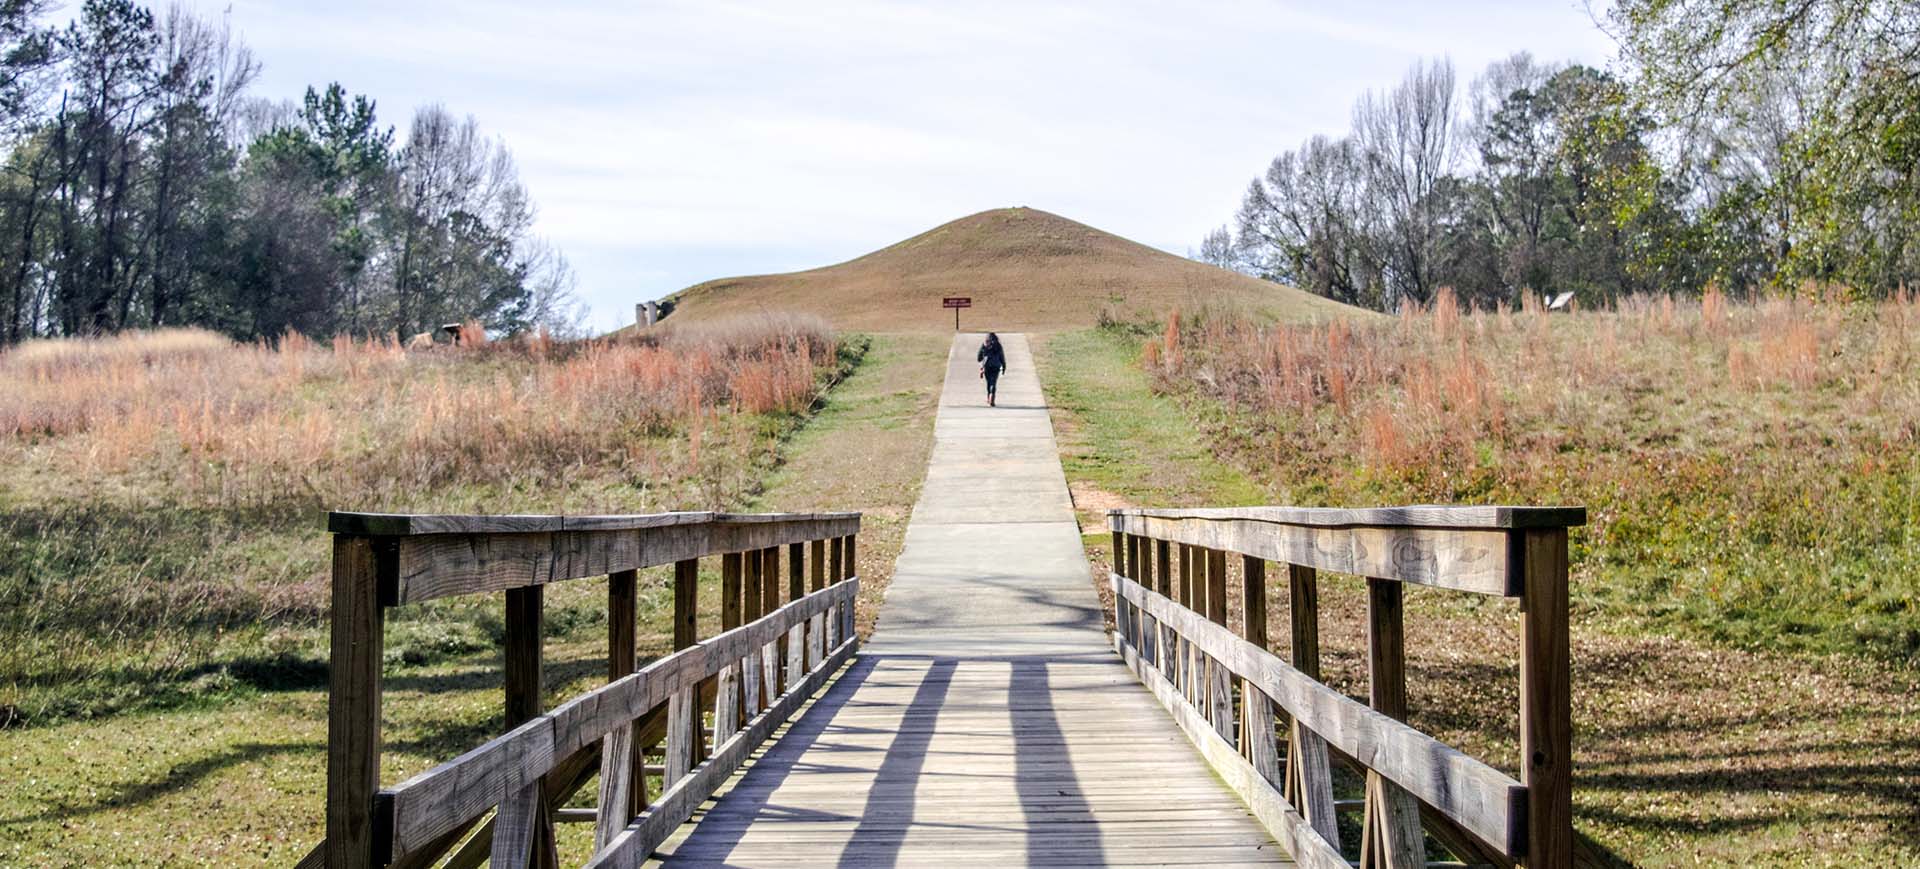 Walking path at the Ocmulgee Mounds National Historic Park